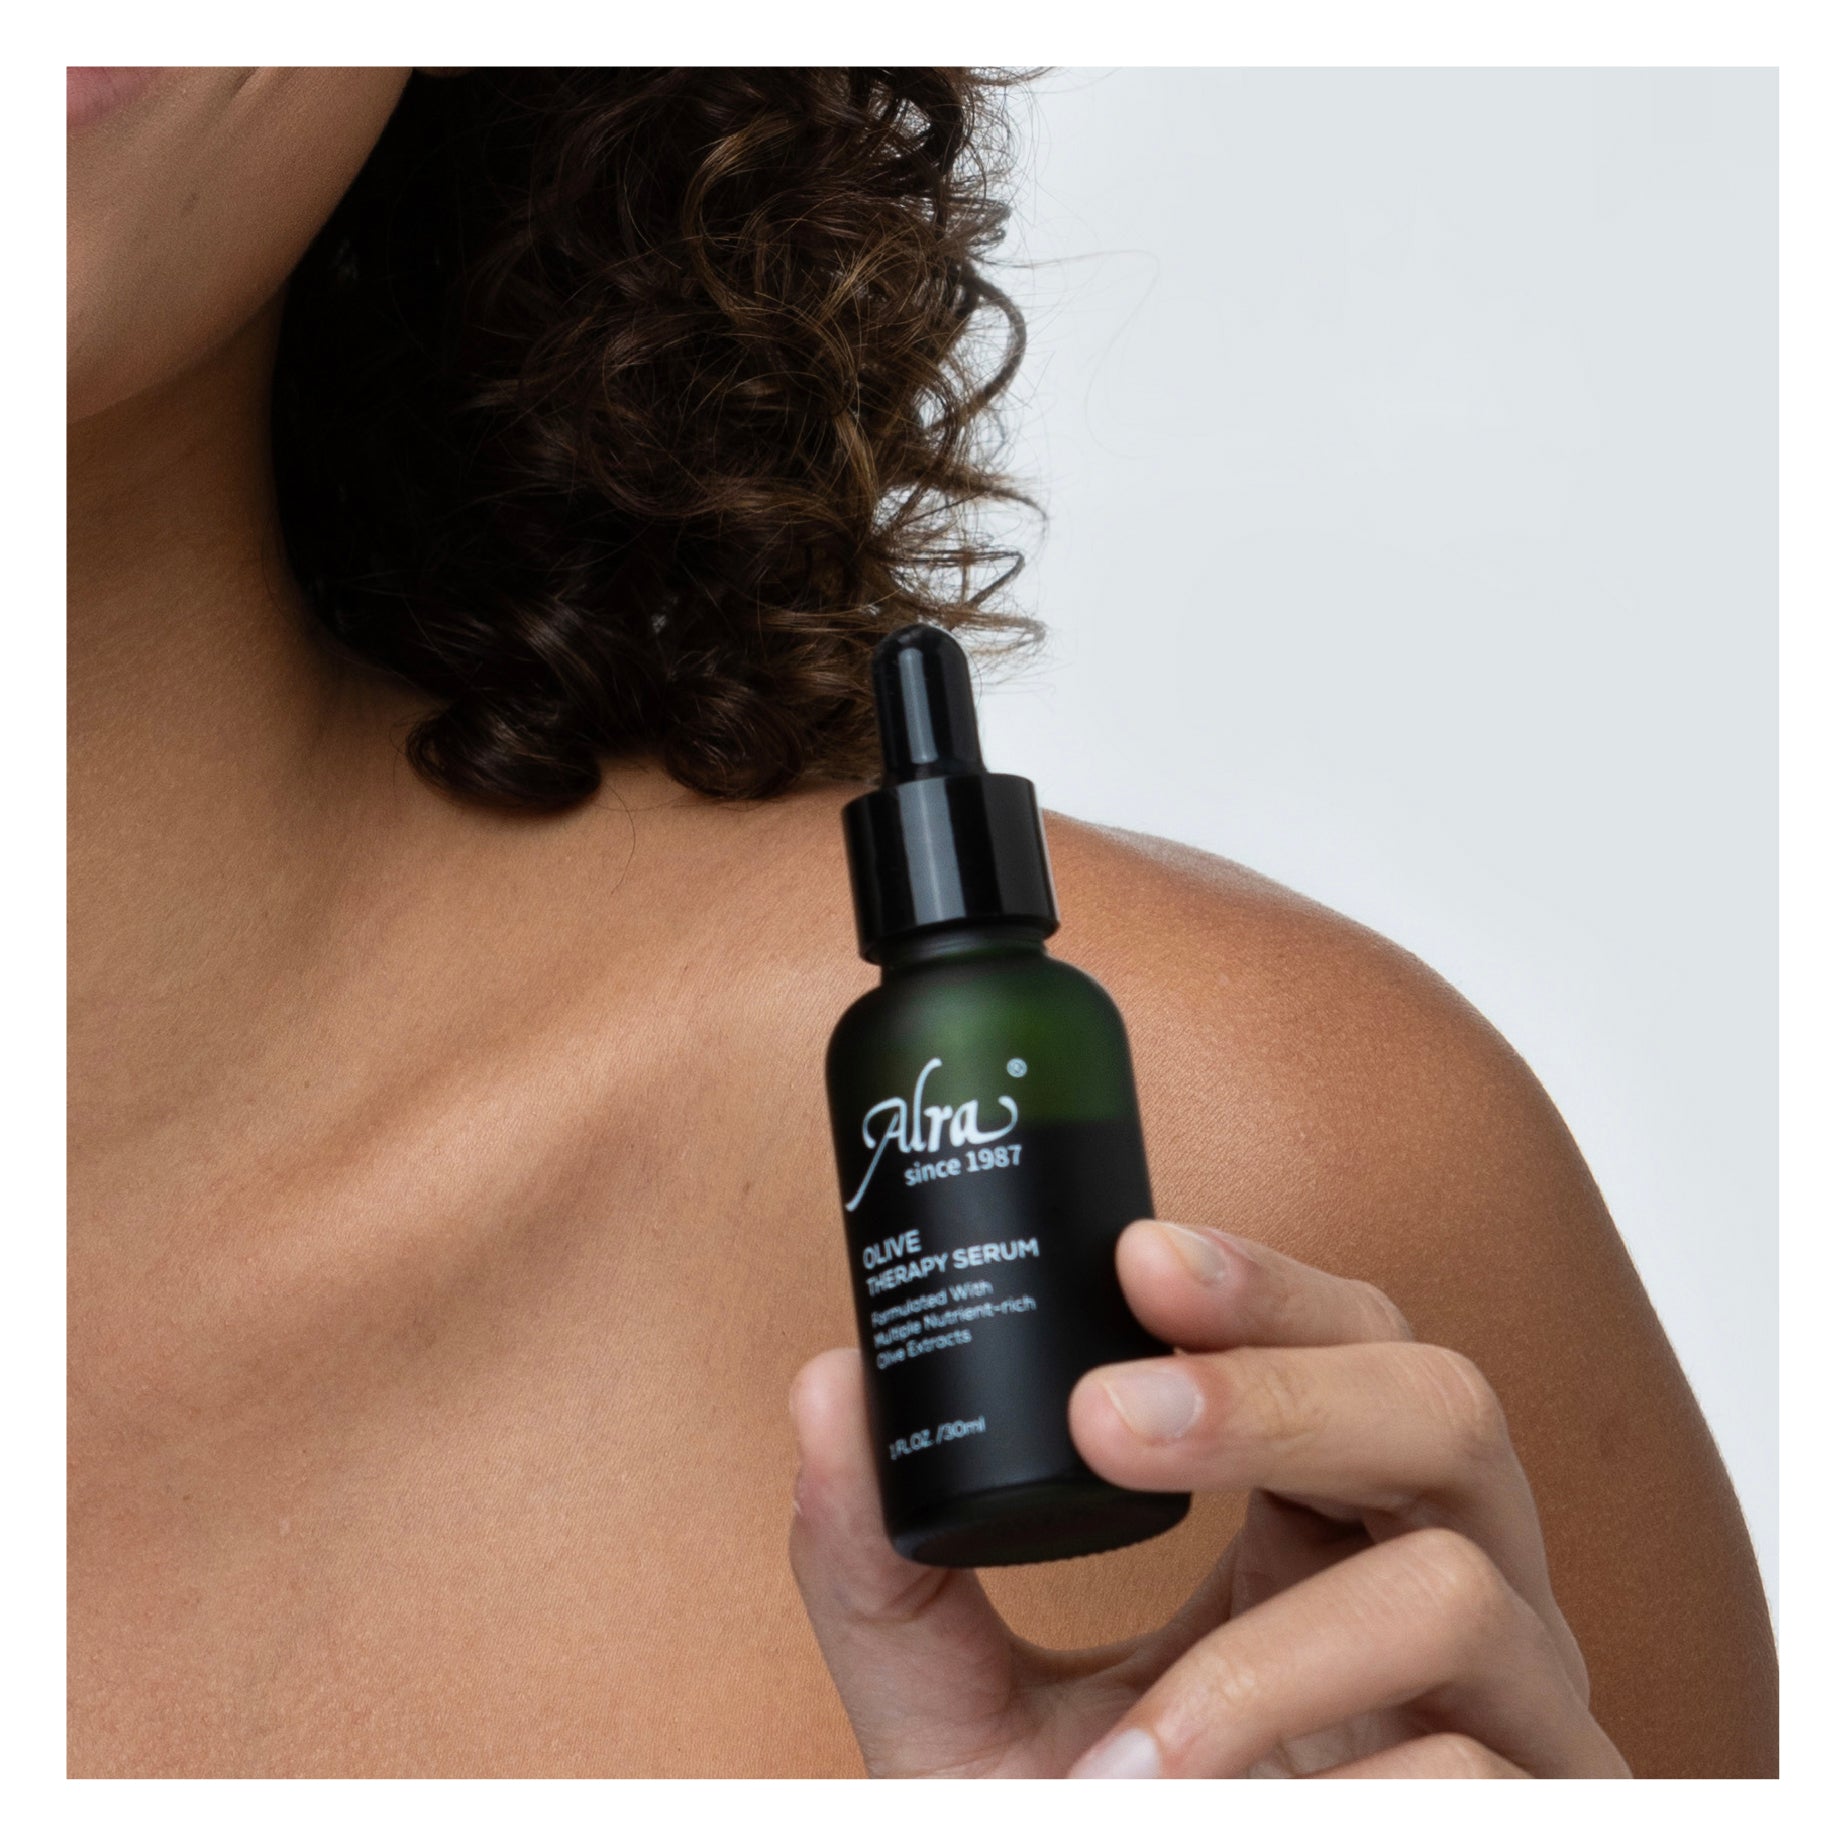 alra olive therapy serum for sensitive skin